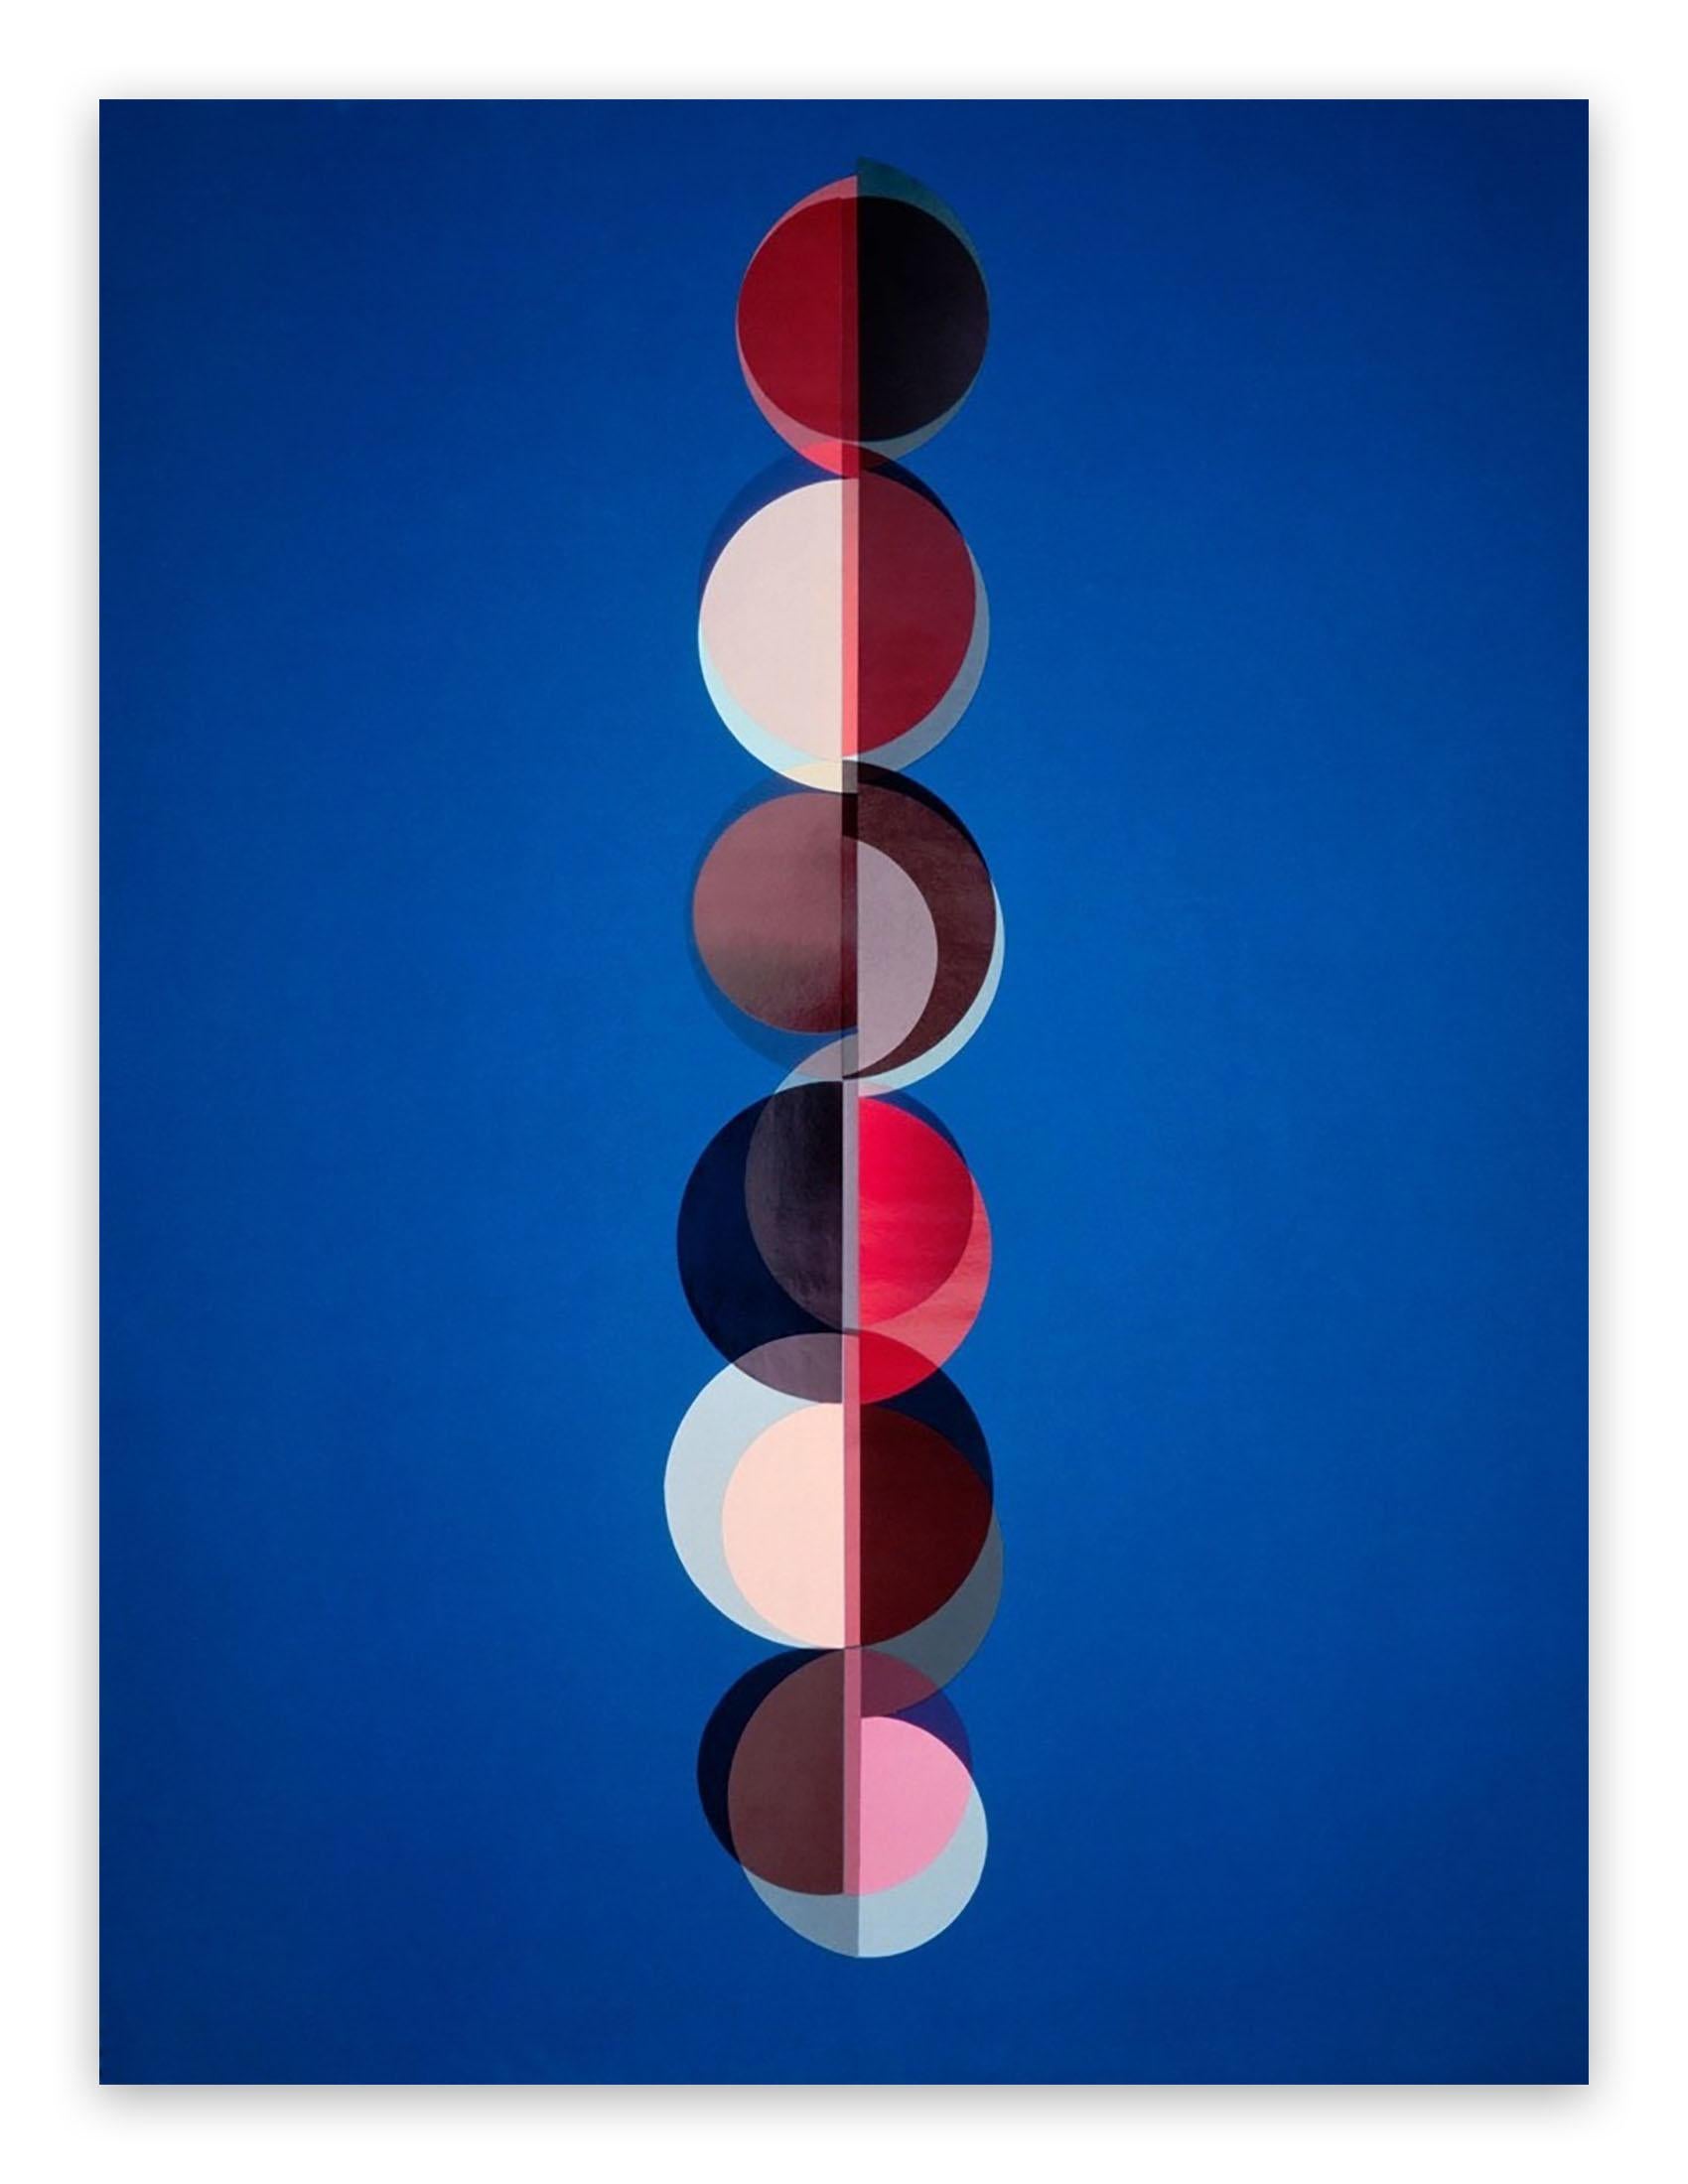 Riff 3 (Abstract Photography)

C print - Unframed.

English abstract artist Richard Caldicott works across the disciplines of painting, photography and sculpture. His work extends a line of visual reasoning that is based on geometry, architectural